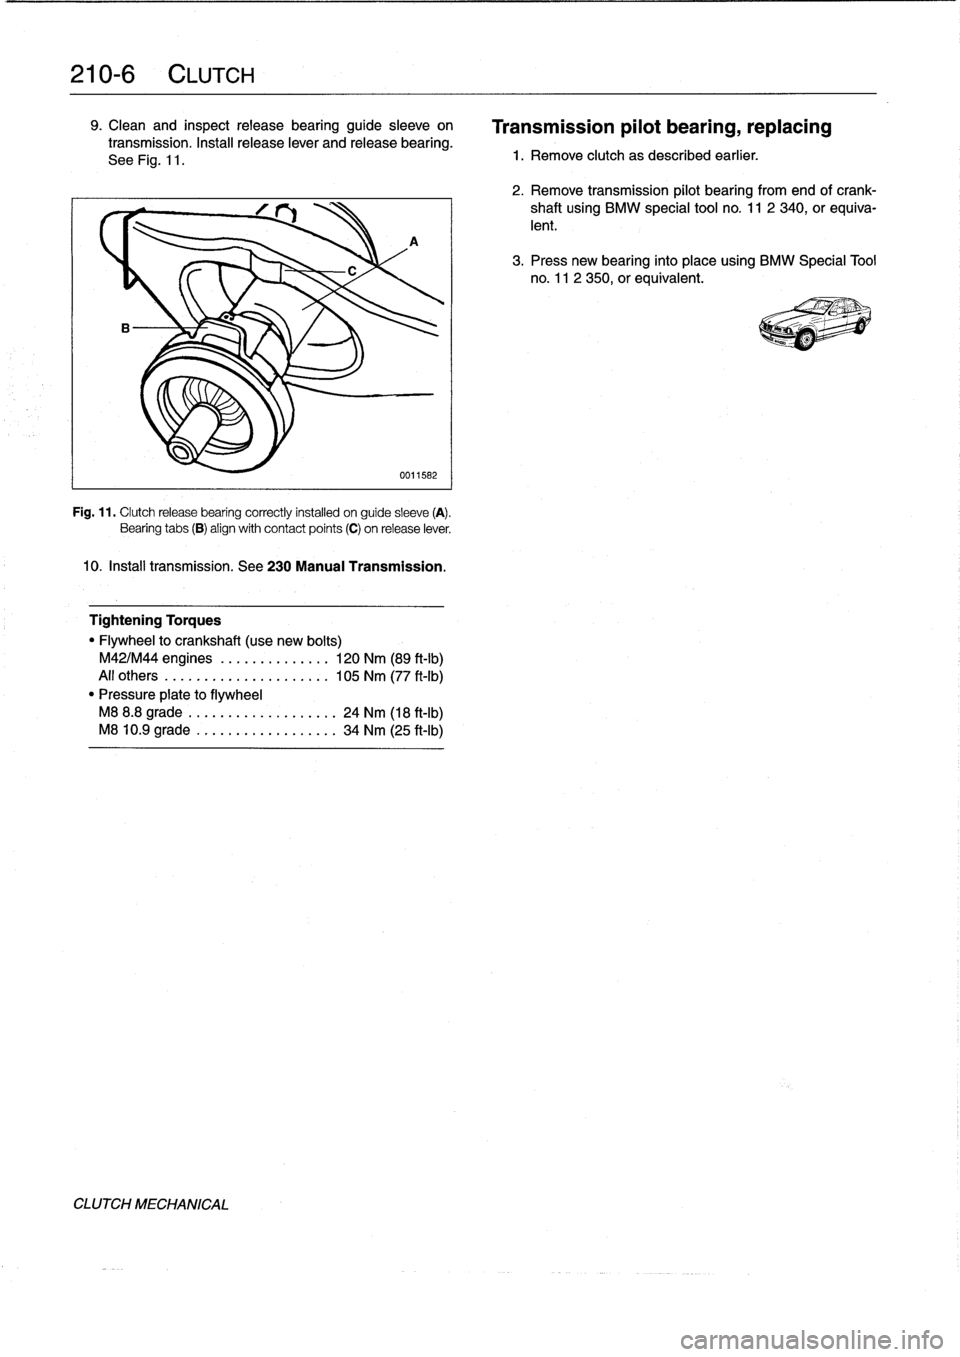 BMW 323i 1993 E36 User Guide 
210-
6
CLUTCH

9
.
Clean
and
inspectrelease
bearing
guide
sleeve
on

transmission
.
Install
release
lever
and
release
bearing
.

See
Fig
.
11
.

A

0011582

Fig
.
11
.
Clutchrelease
bearing
correctly